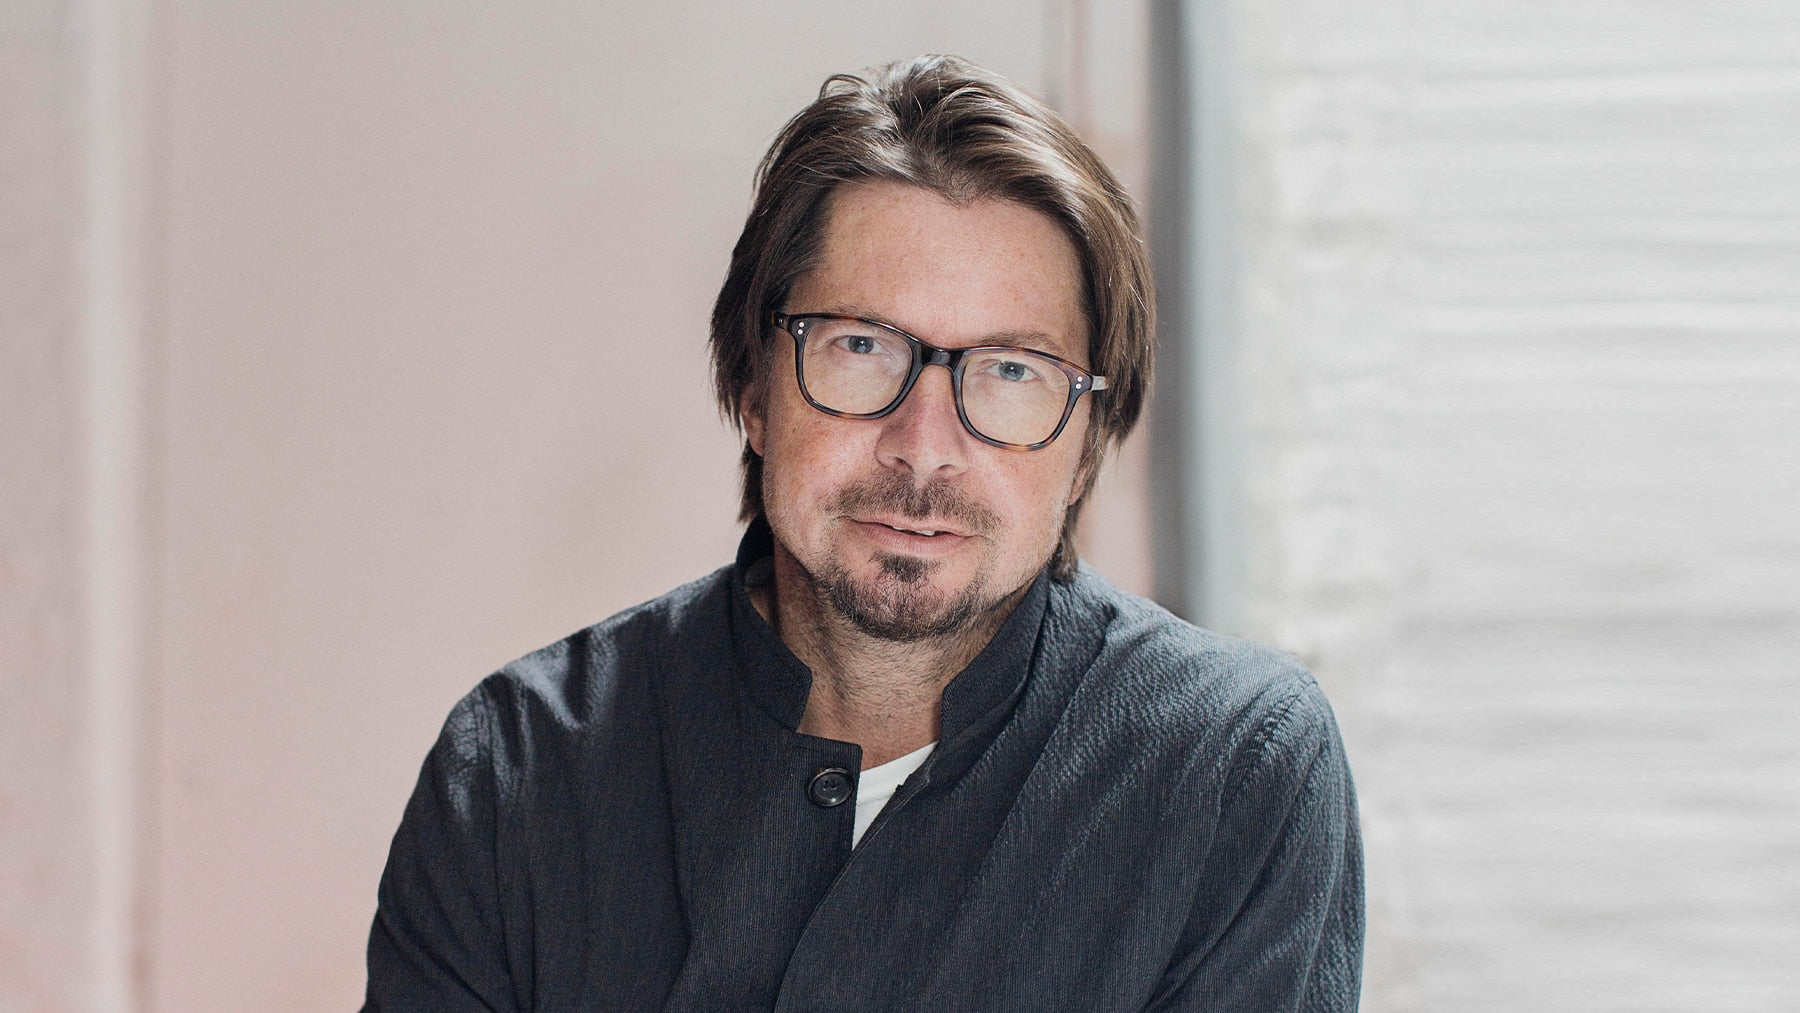 The BOF Podcast: Oliver Spencer on The Ups and Downs of Building a Fashion Business